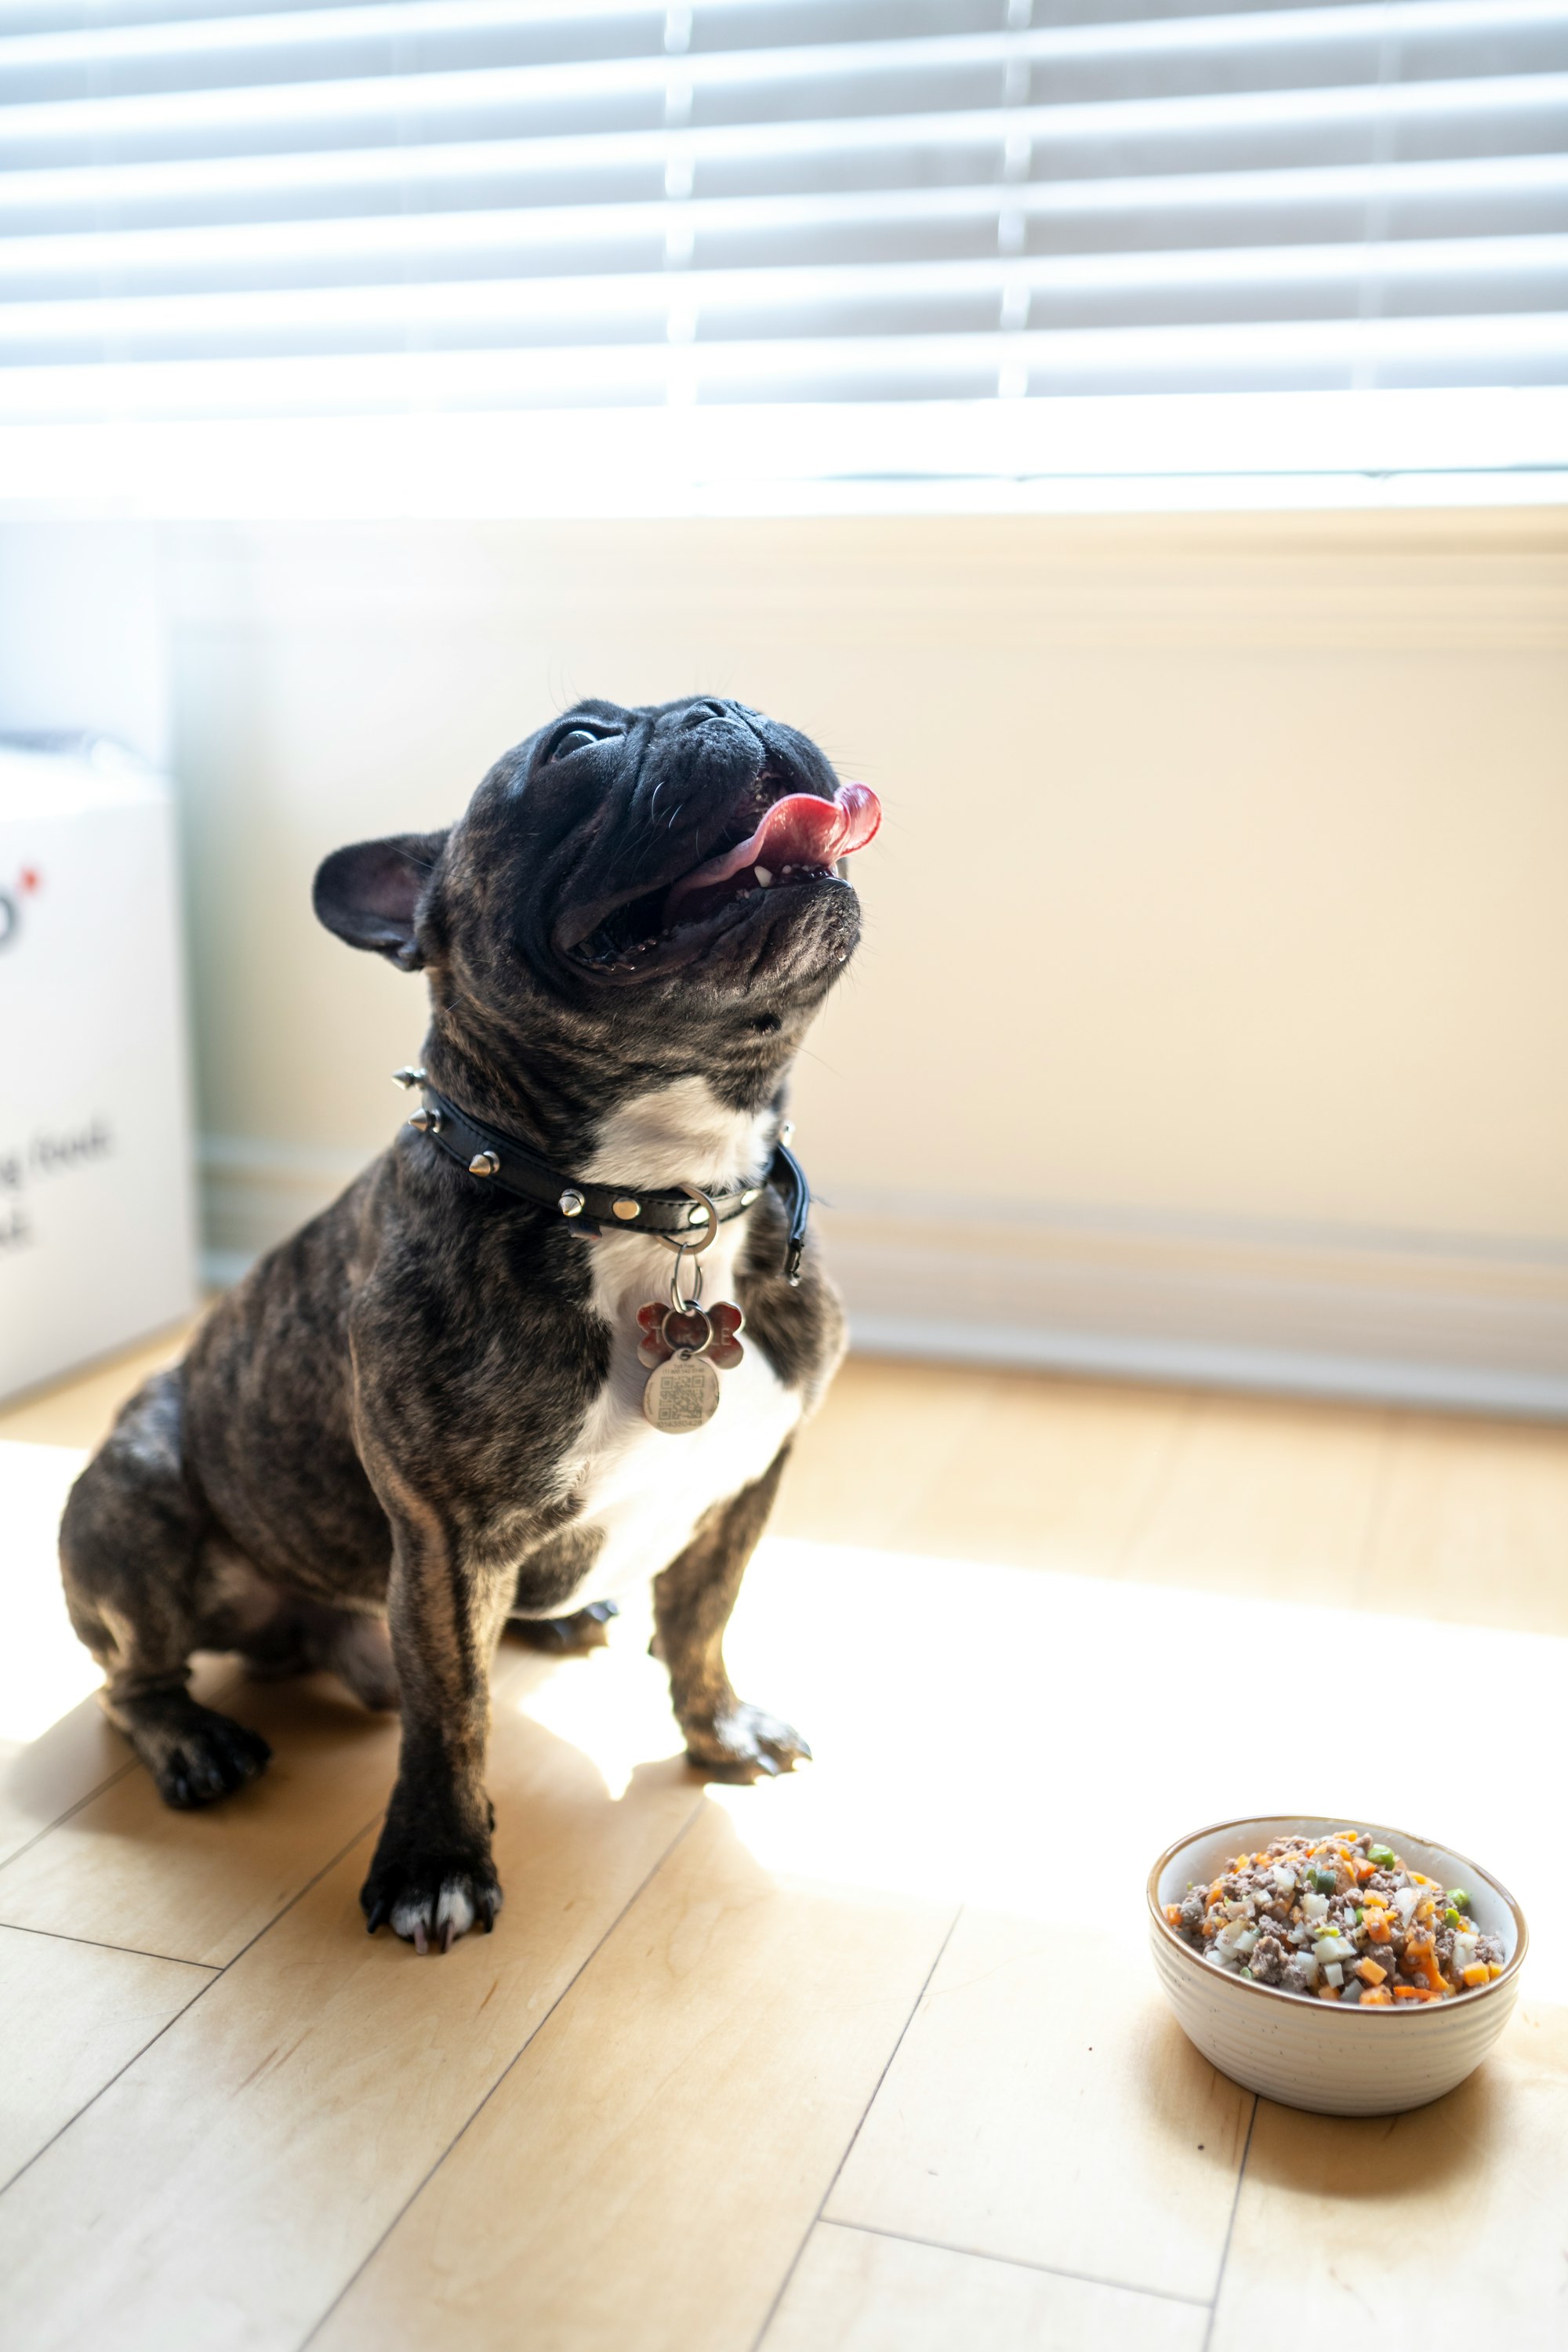 How to Soften Dog Food